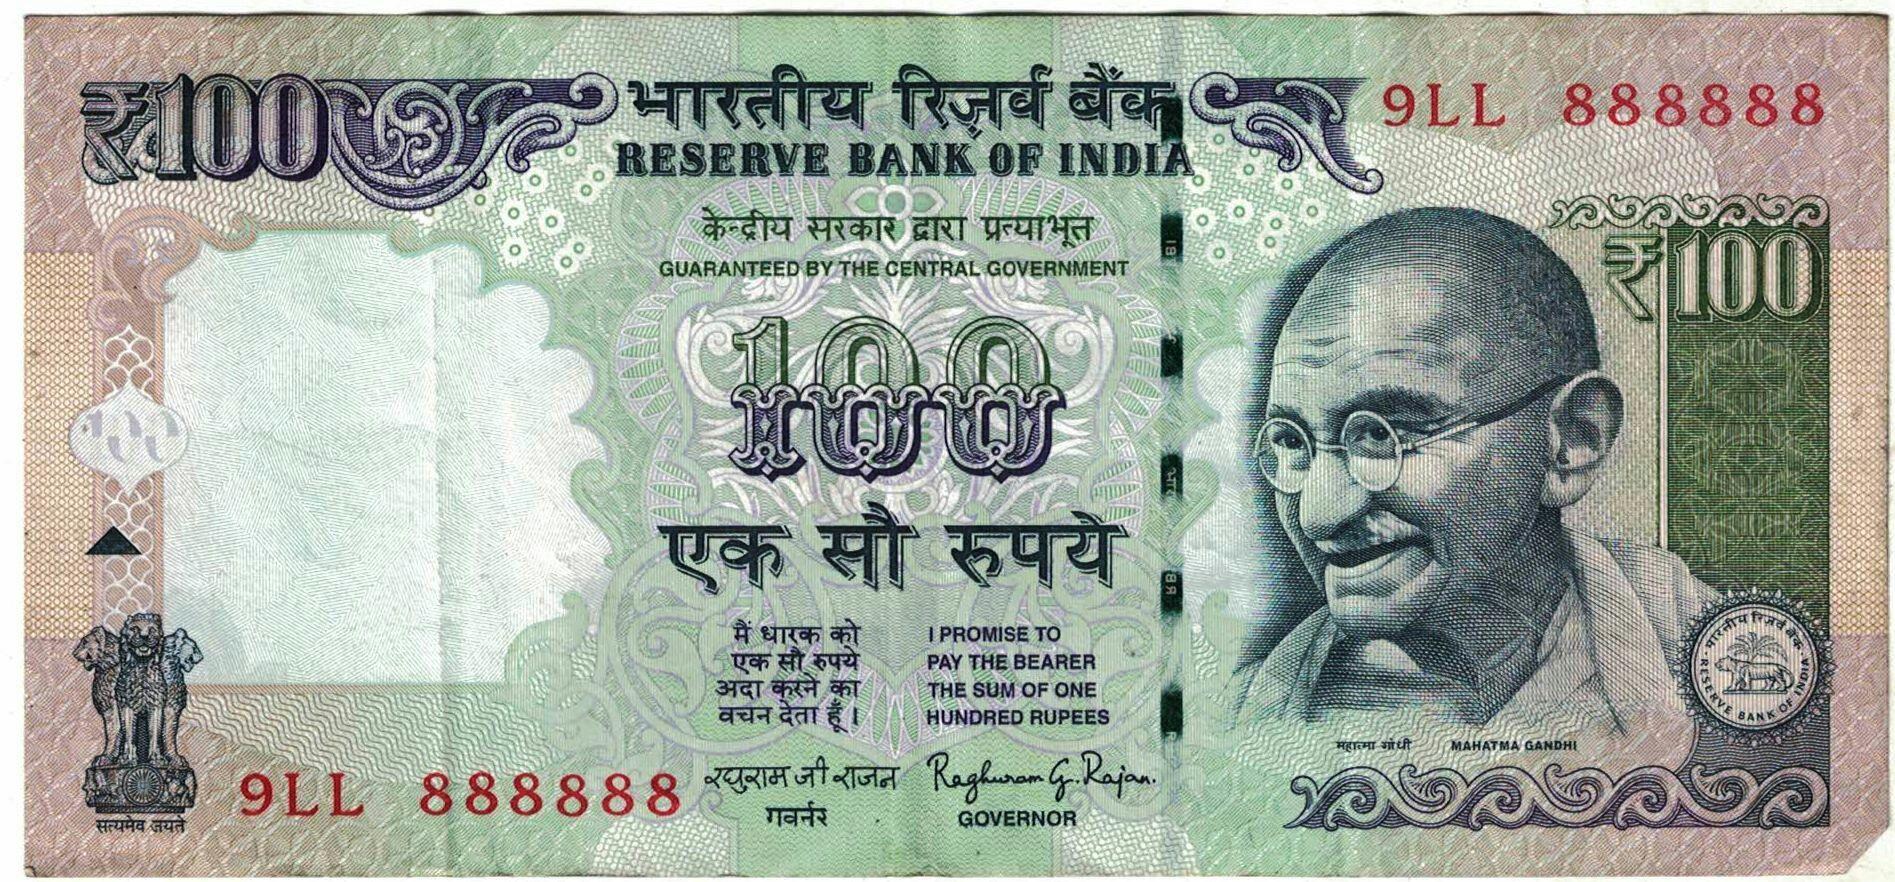 Indian currency Rs. 100 note with unique serial number: 9LL 888888